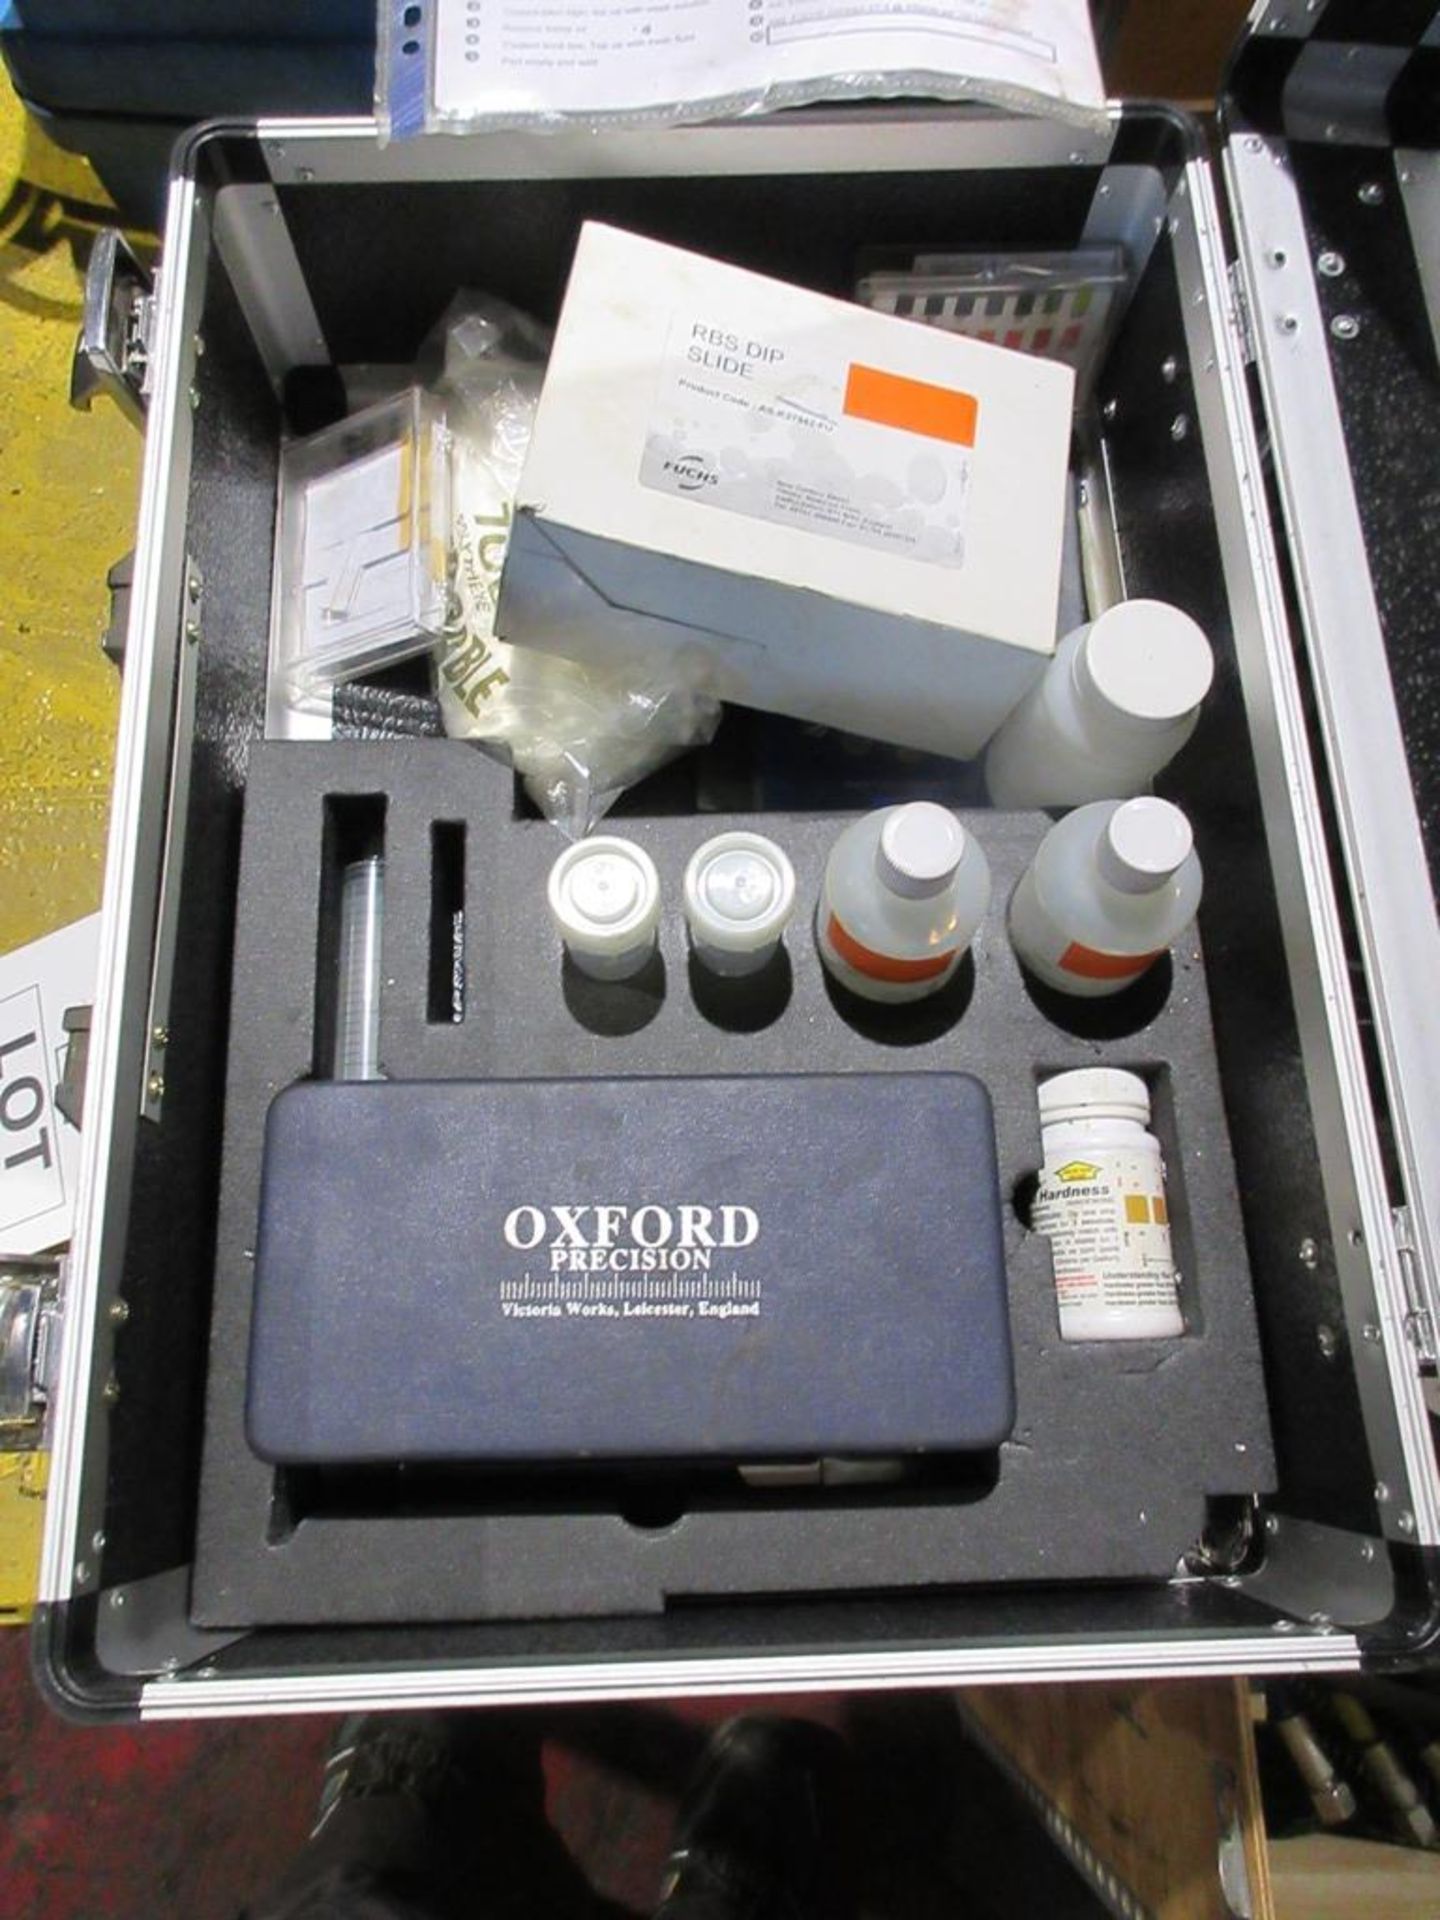 Cutting fluid test kit with case